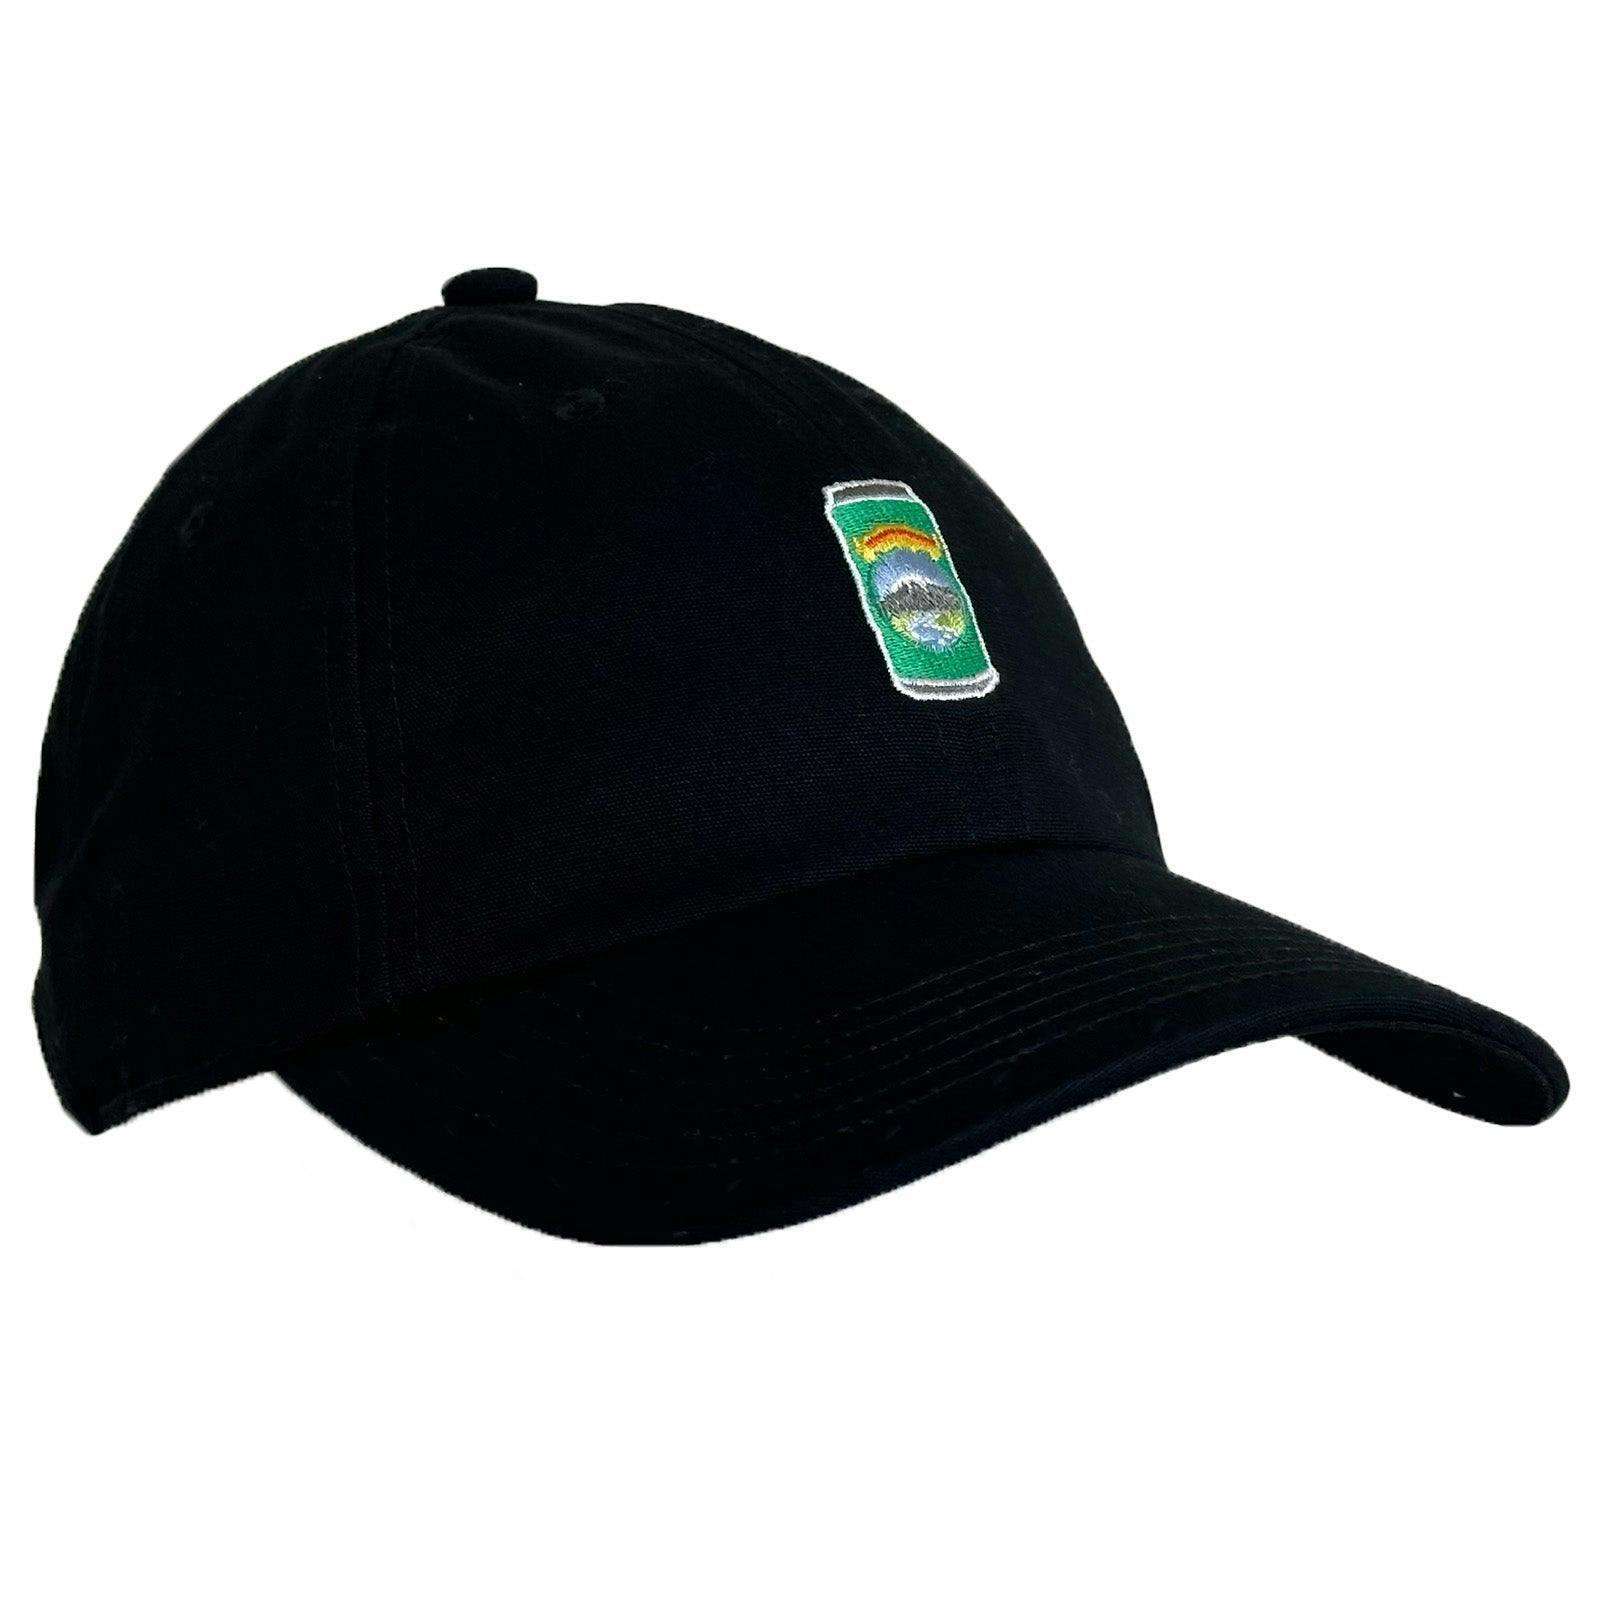 Sierra Nevada Brewing Co. Pale Ale Can Dad Hat in black - front view